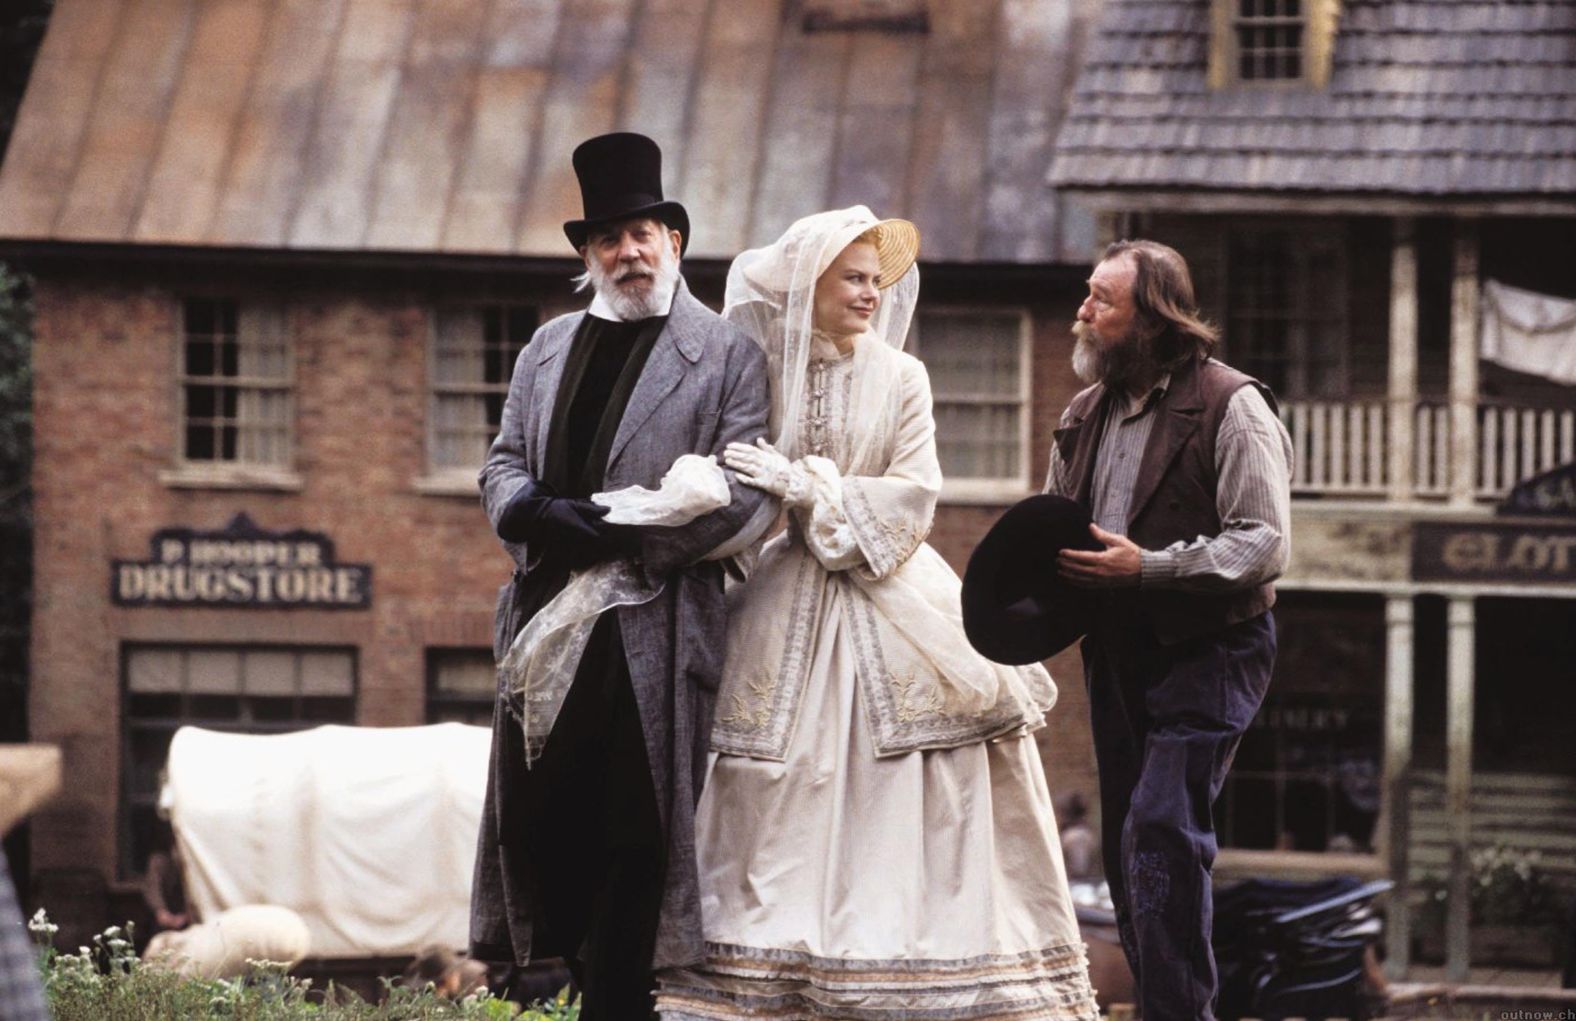 Kidman appears in 2003's "Cold Mountain" with Donald Sutherland, left, and James Gammon.